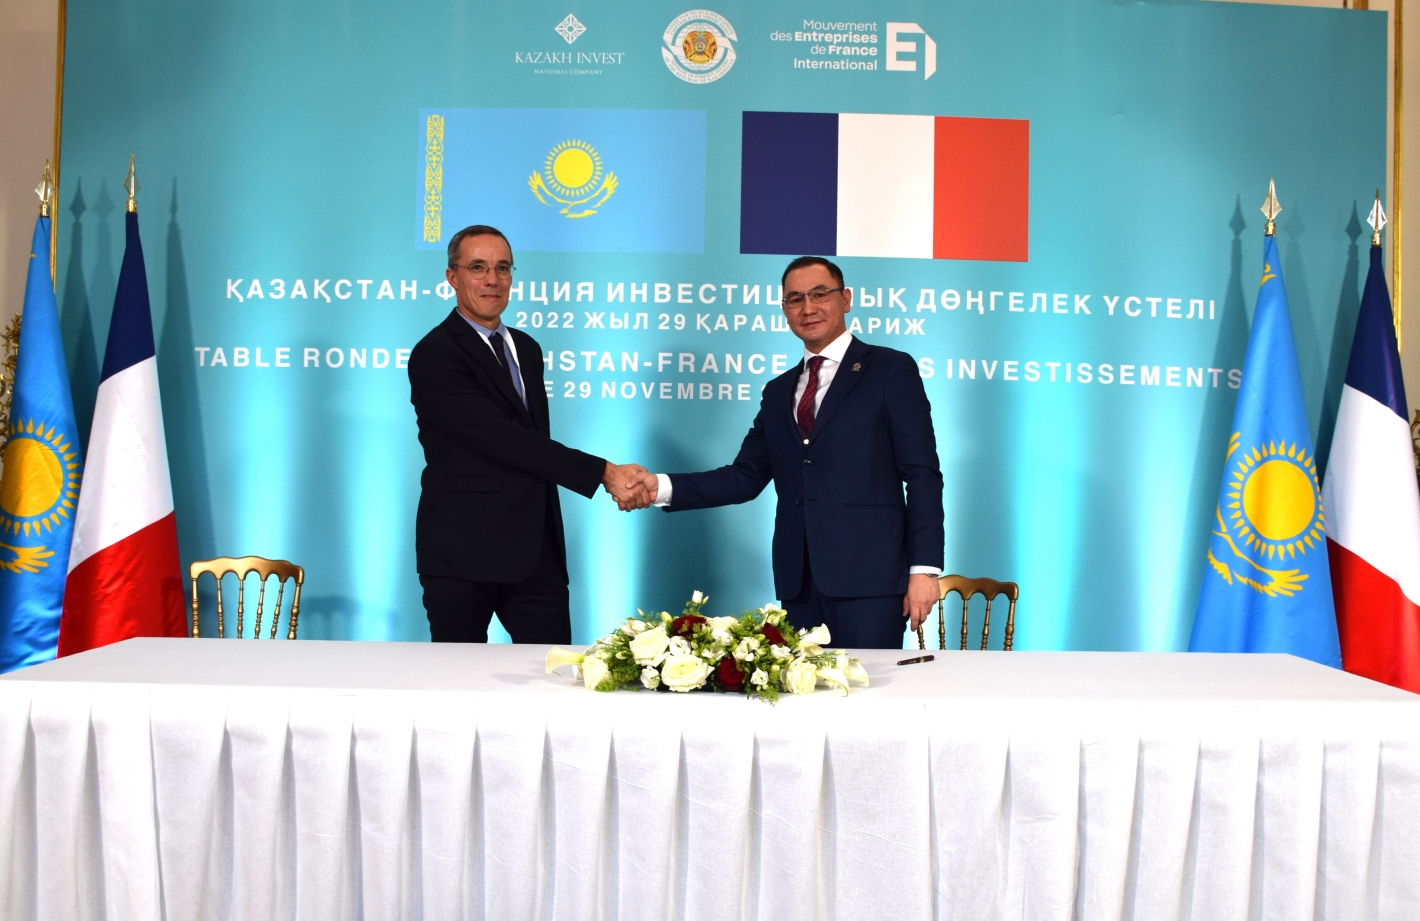 Kazatomprom has signed memorandums of cooperation in the nuclear industry with French companies